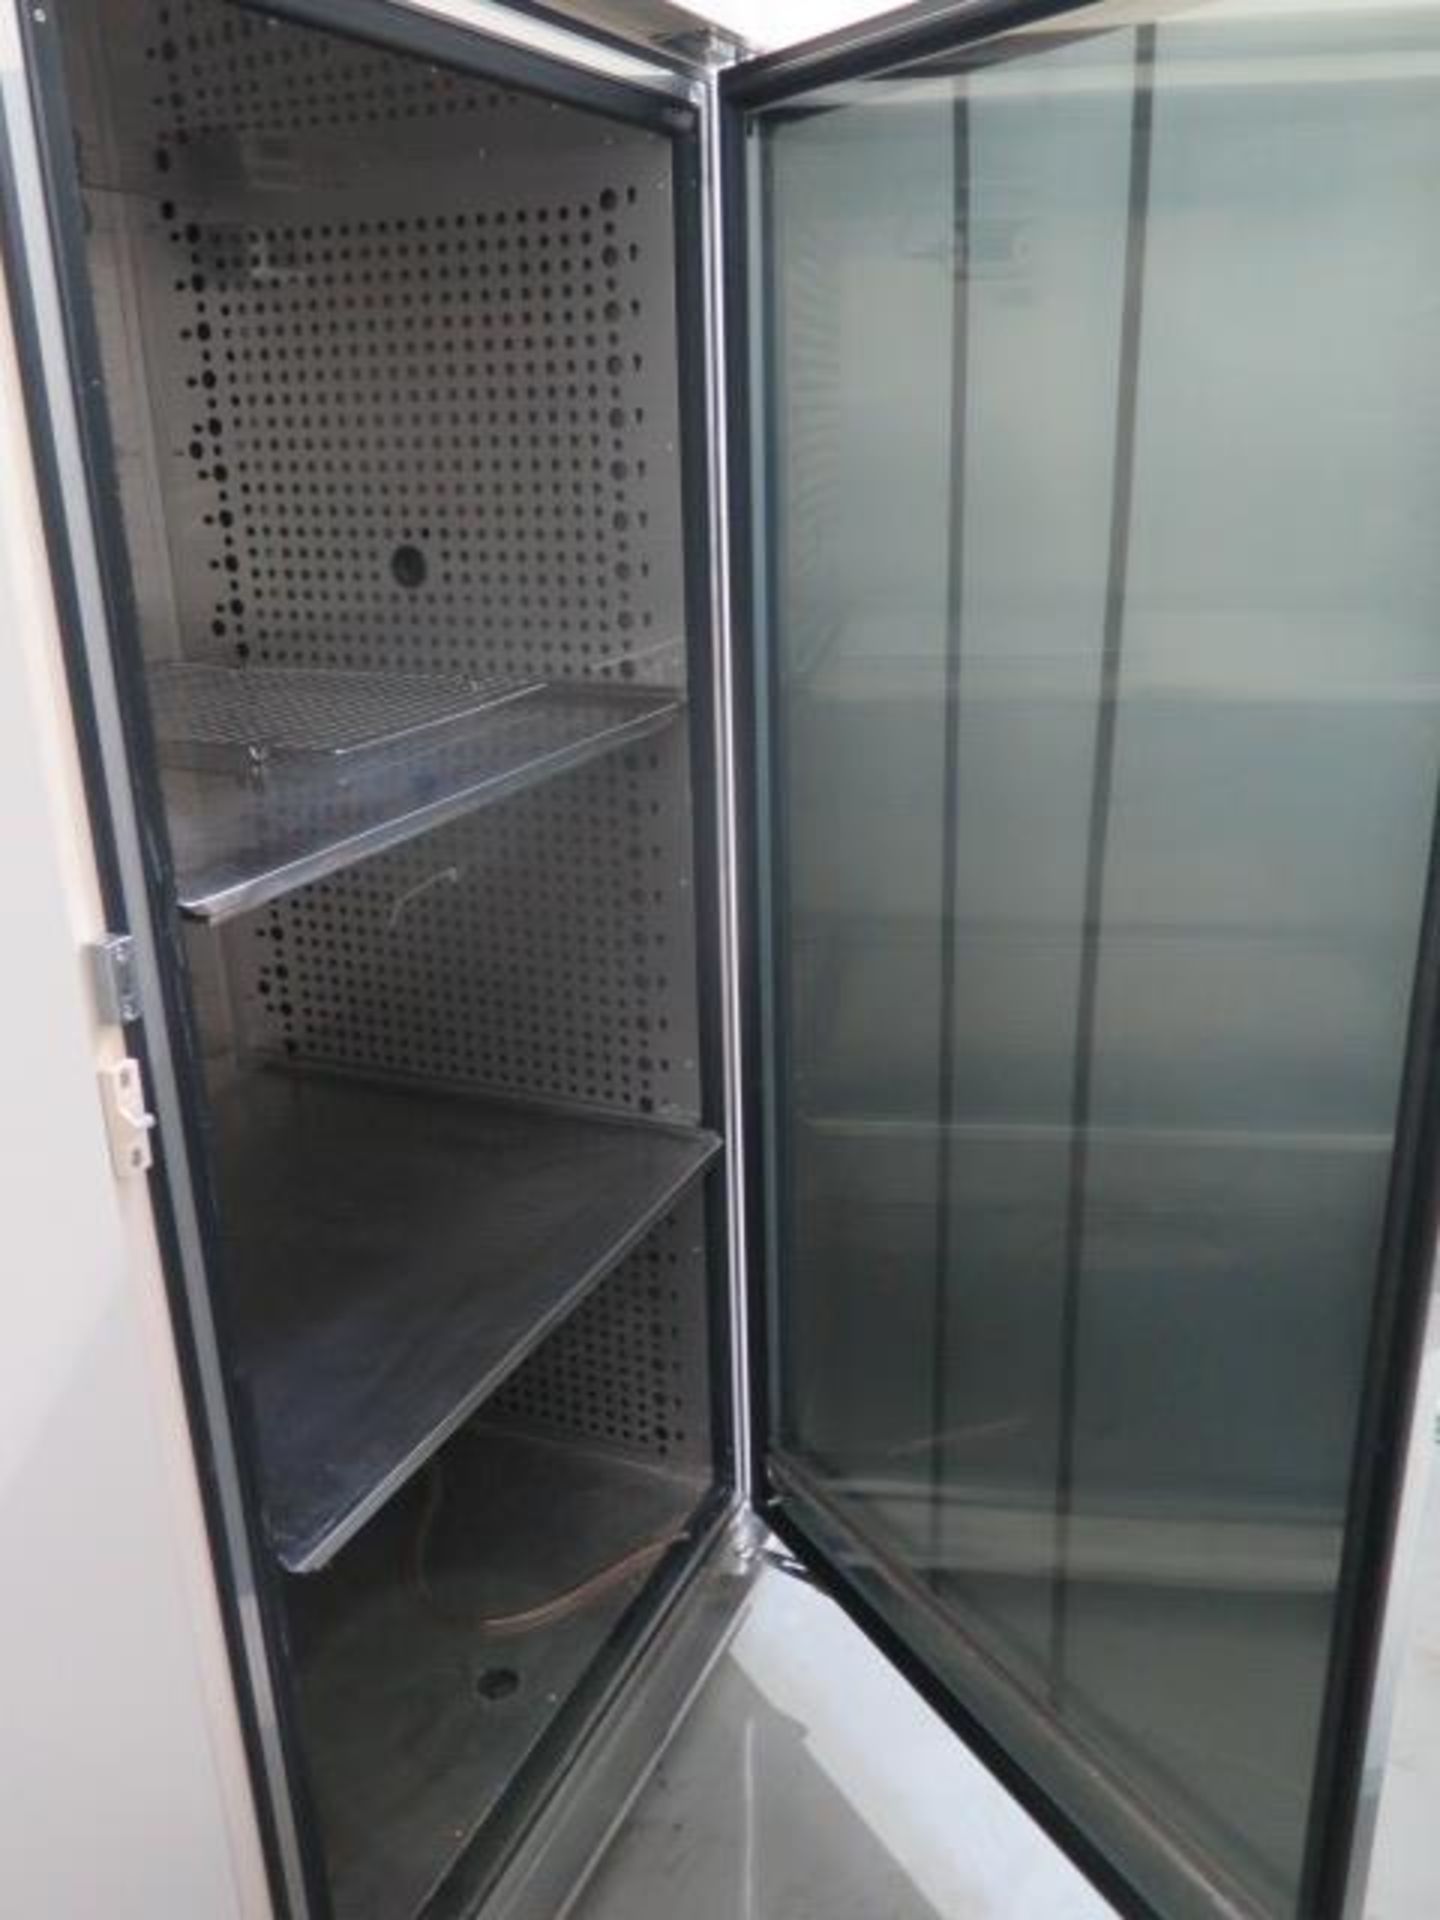 Thermo Scientific mdl. 3950 Forma Reach-In CO2 Incubator s/n 309842-1827 (SOLD AS-IS - NO WARRANTY) - Image 3 of 8